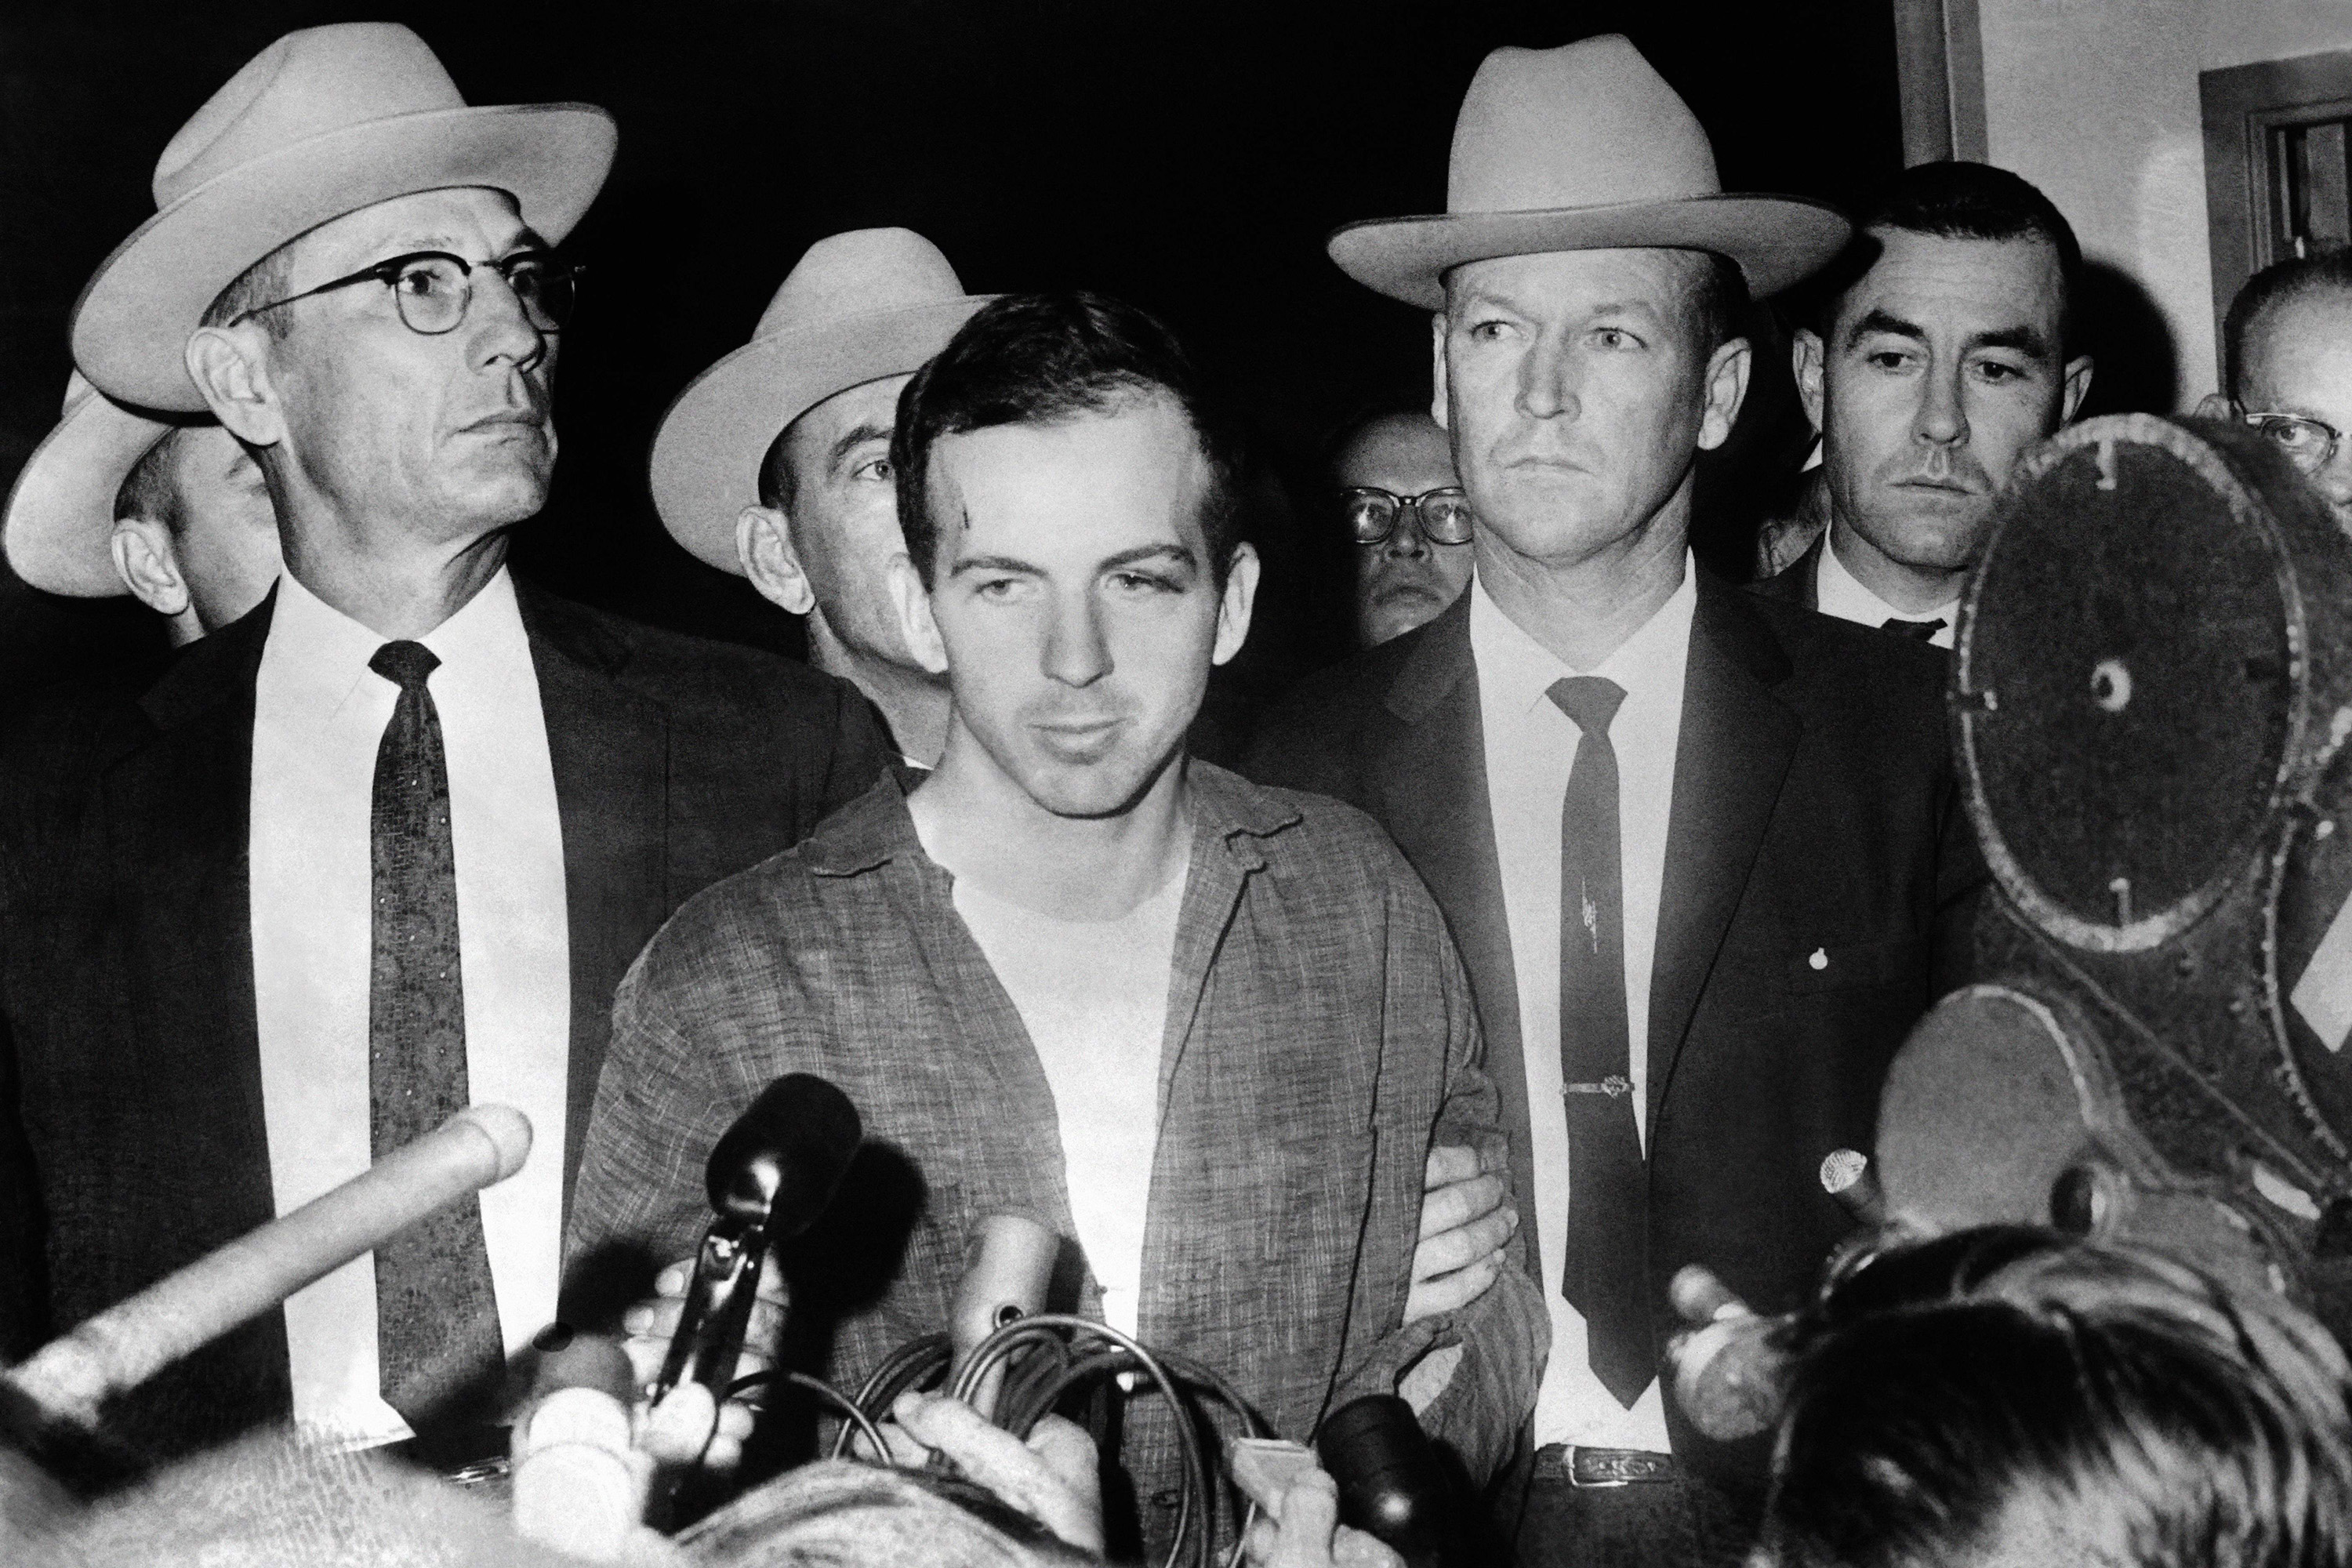 Cuban exile told sons he trained Lee Harvey Oswald at secret CIA camp